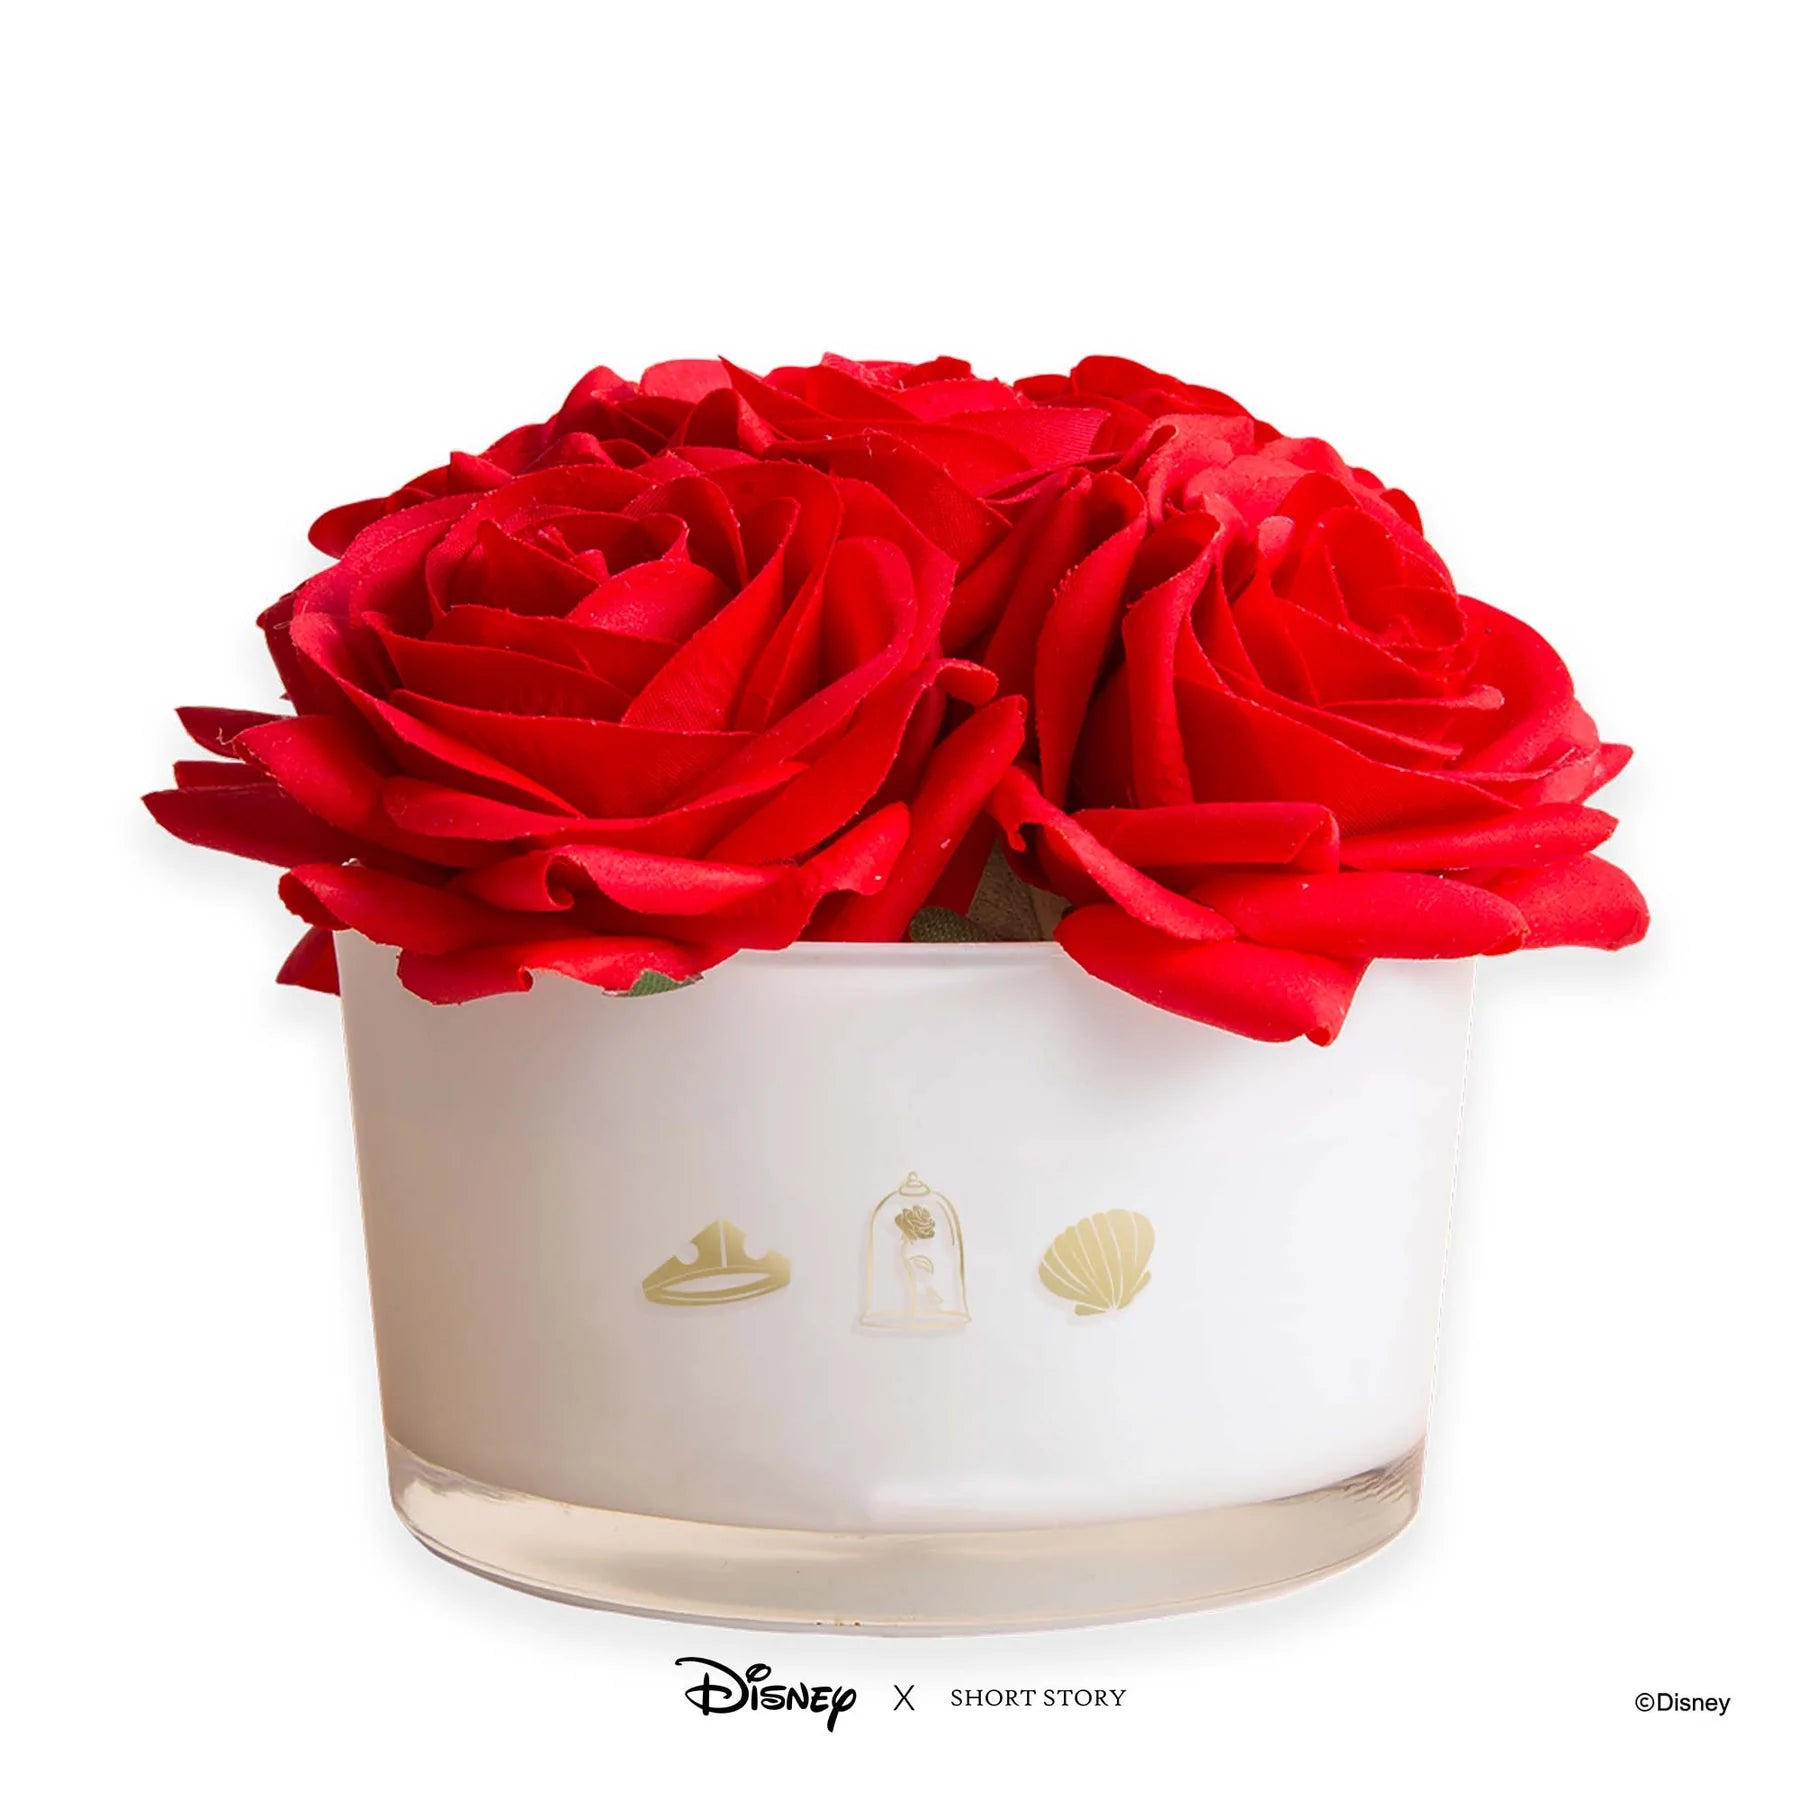 Short Story - Disney Diffuser Floral Bouquet Beauty and the Beast